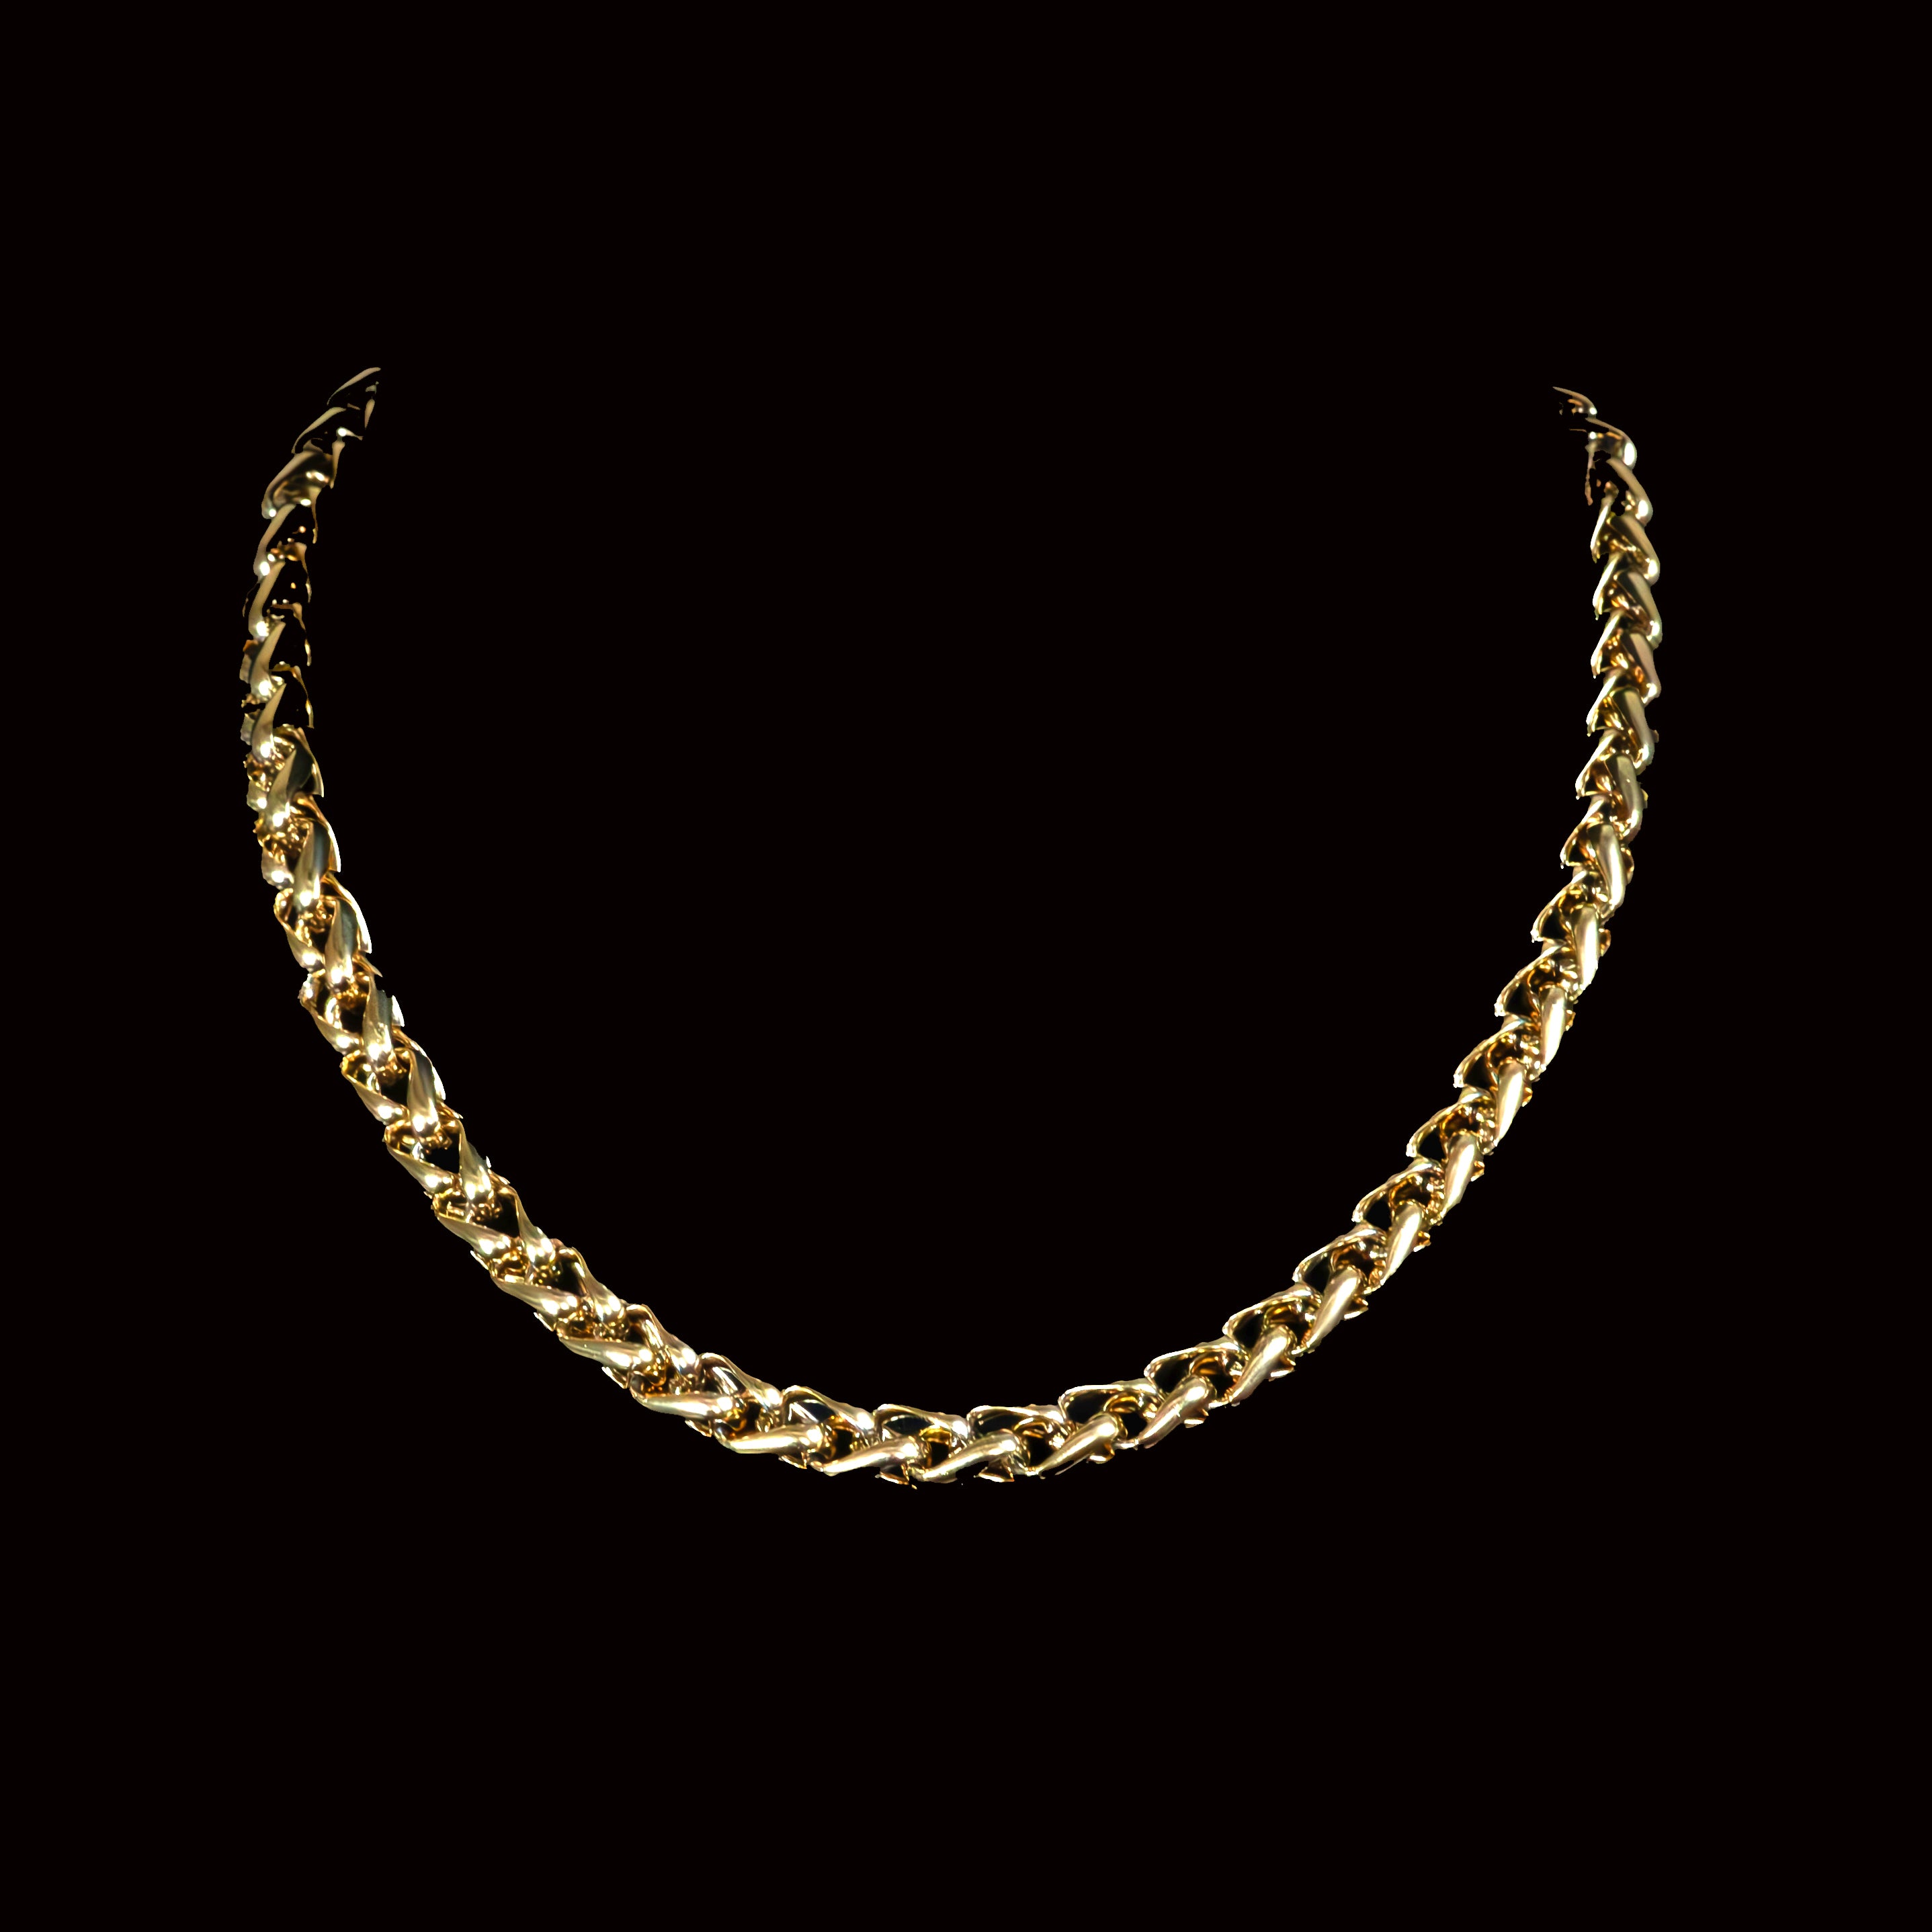 Enesenico Stainless Steel Wheat Chain Necklace